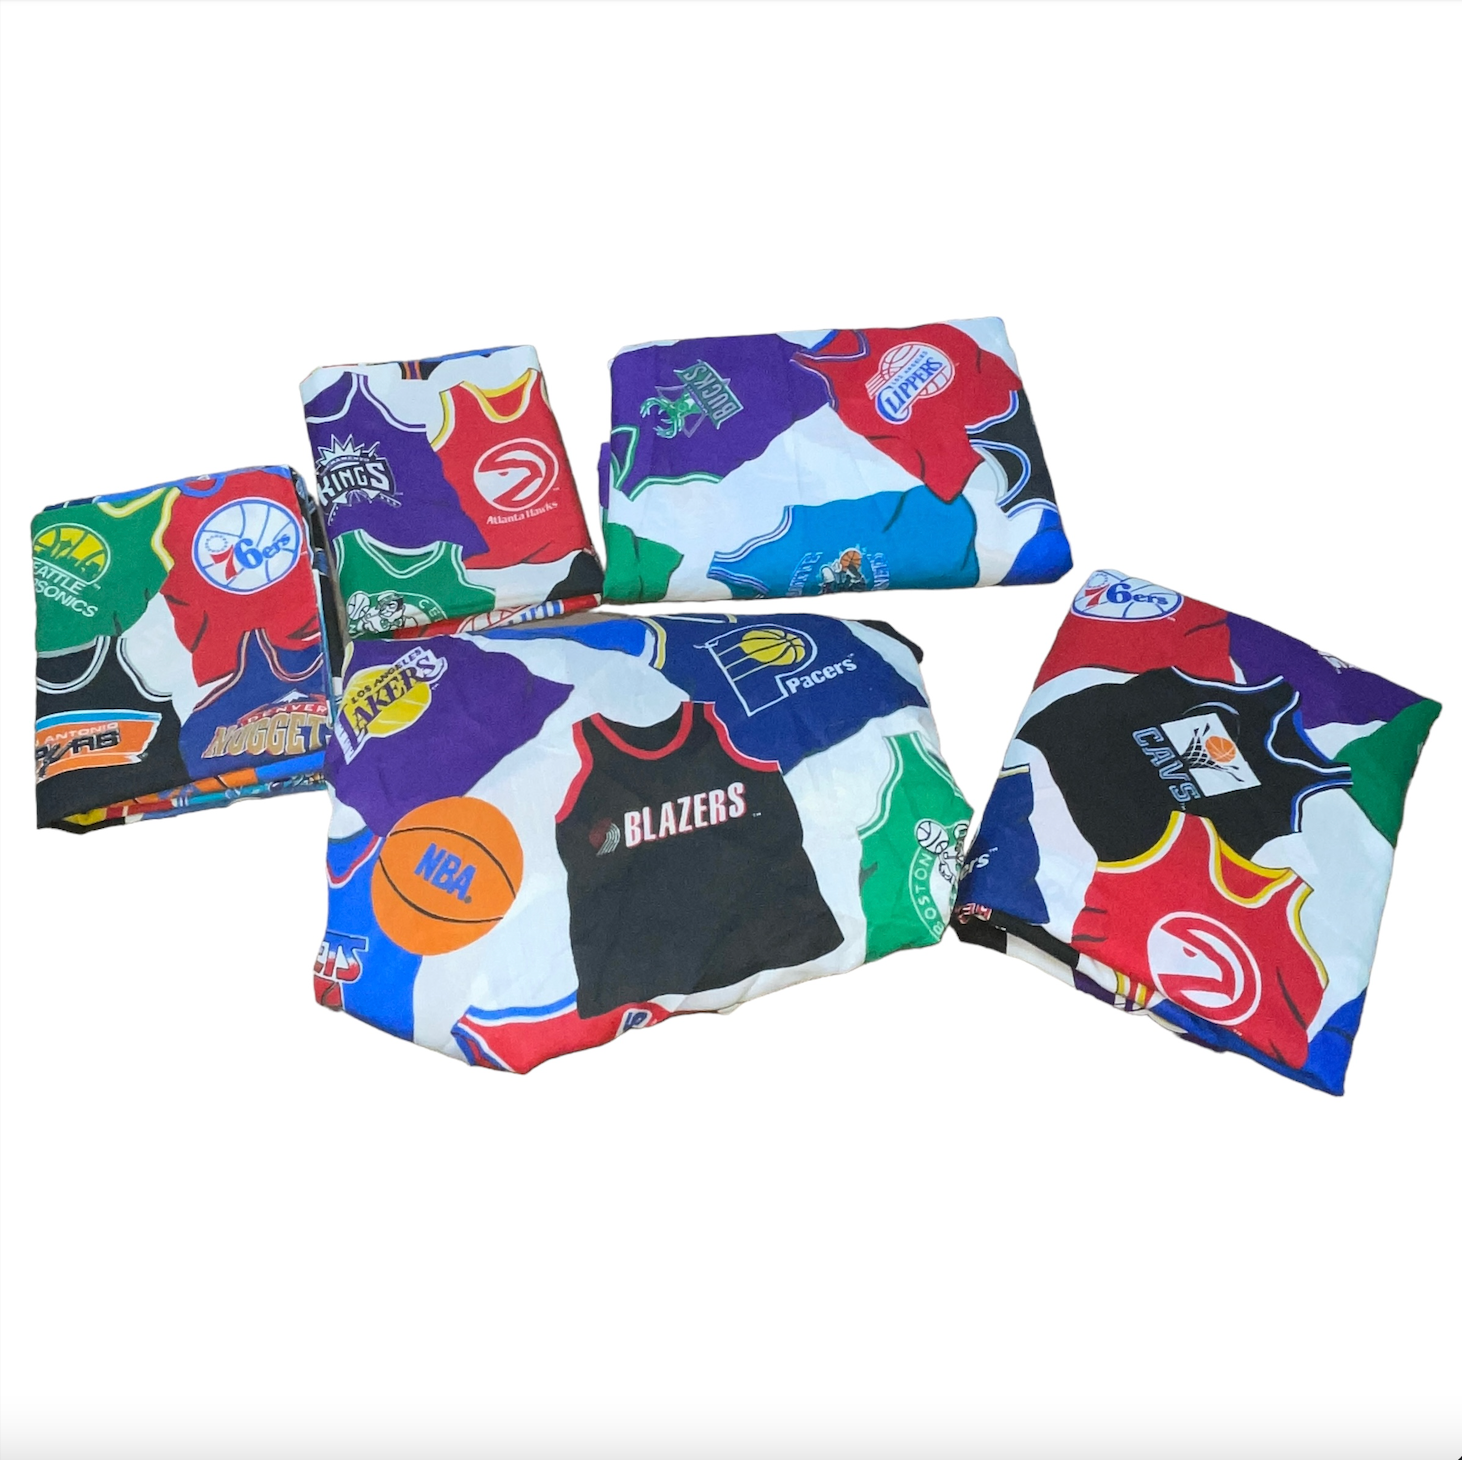 Vintage 1990s NBA Basketball Twin Sheet Set Flat Fitted Pillowcases 5 Piece Lot - $64.99